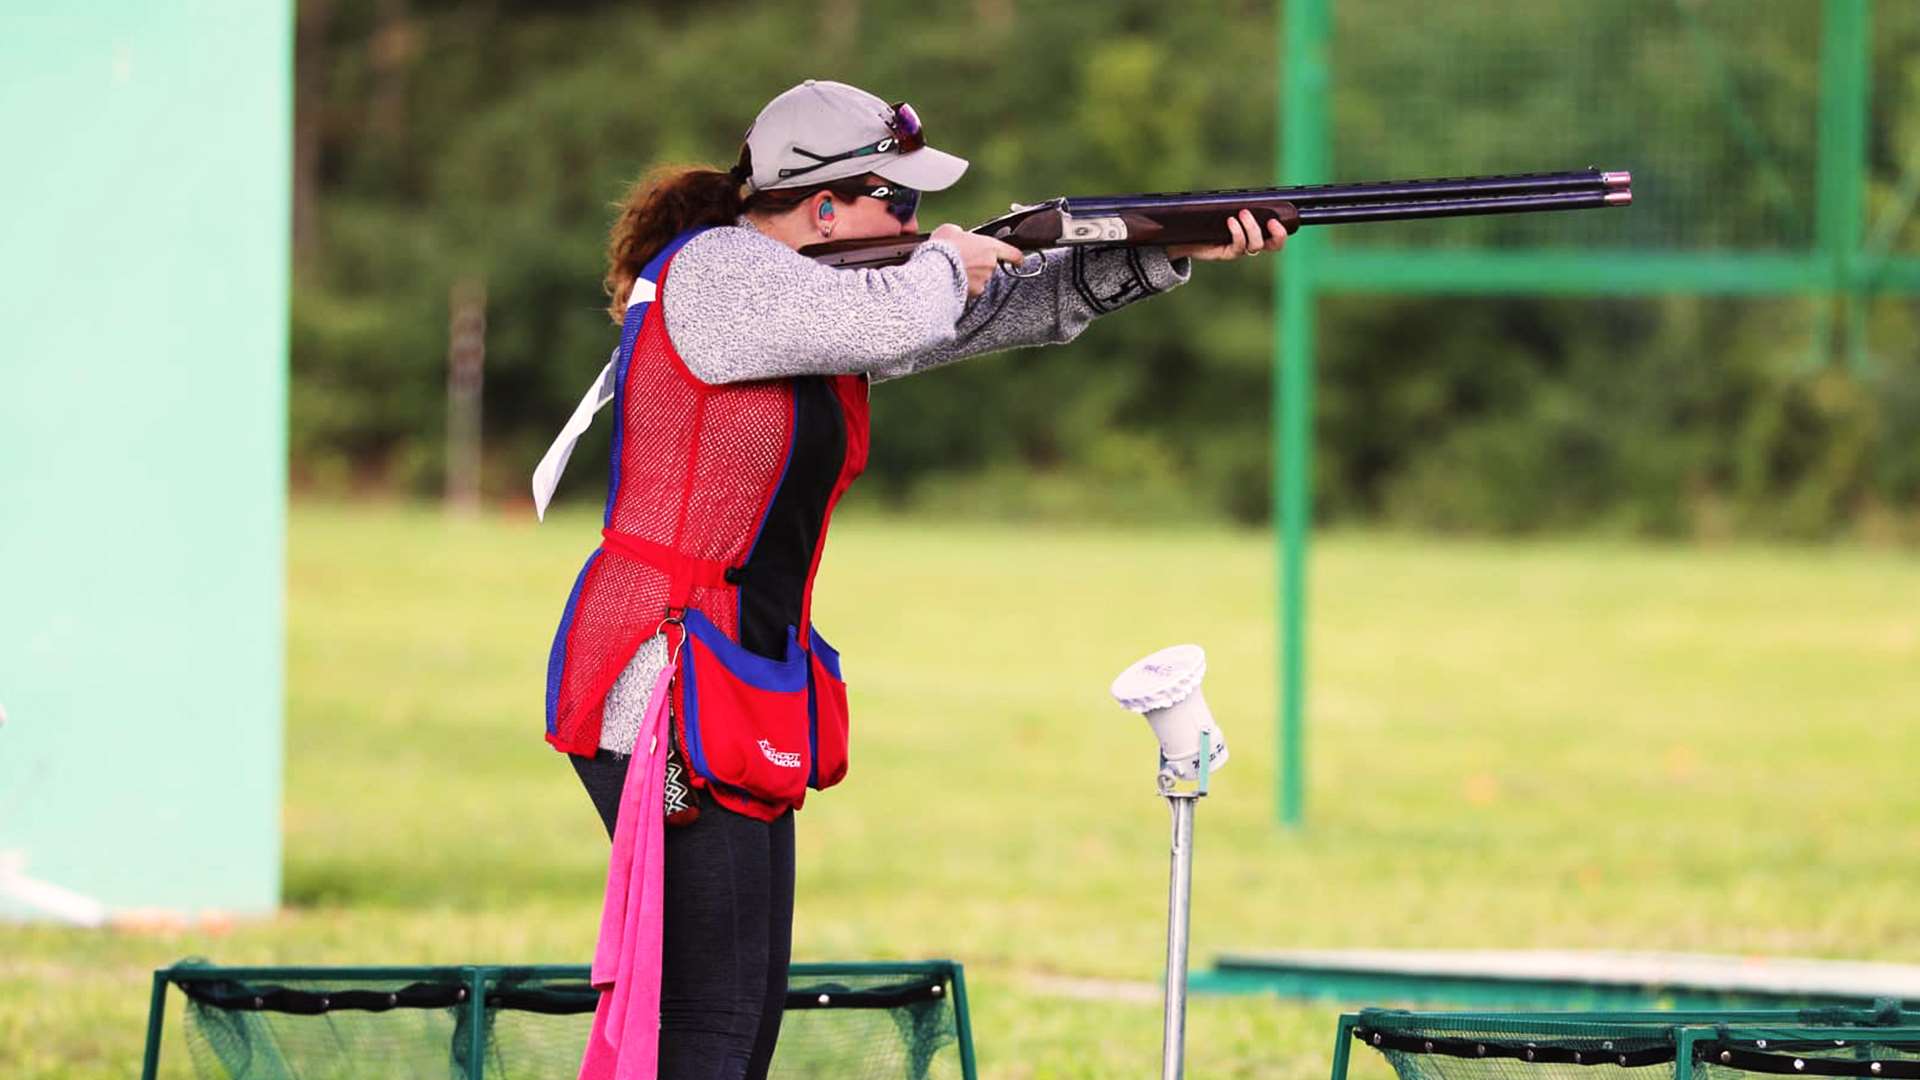 Trapshooter in Croatia at Worlds